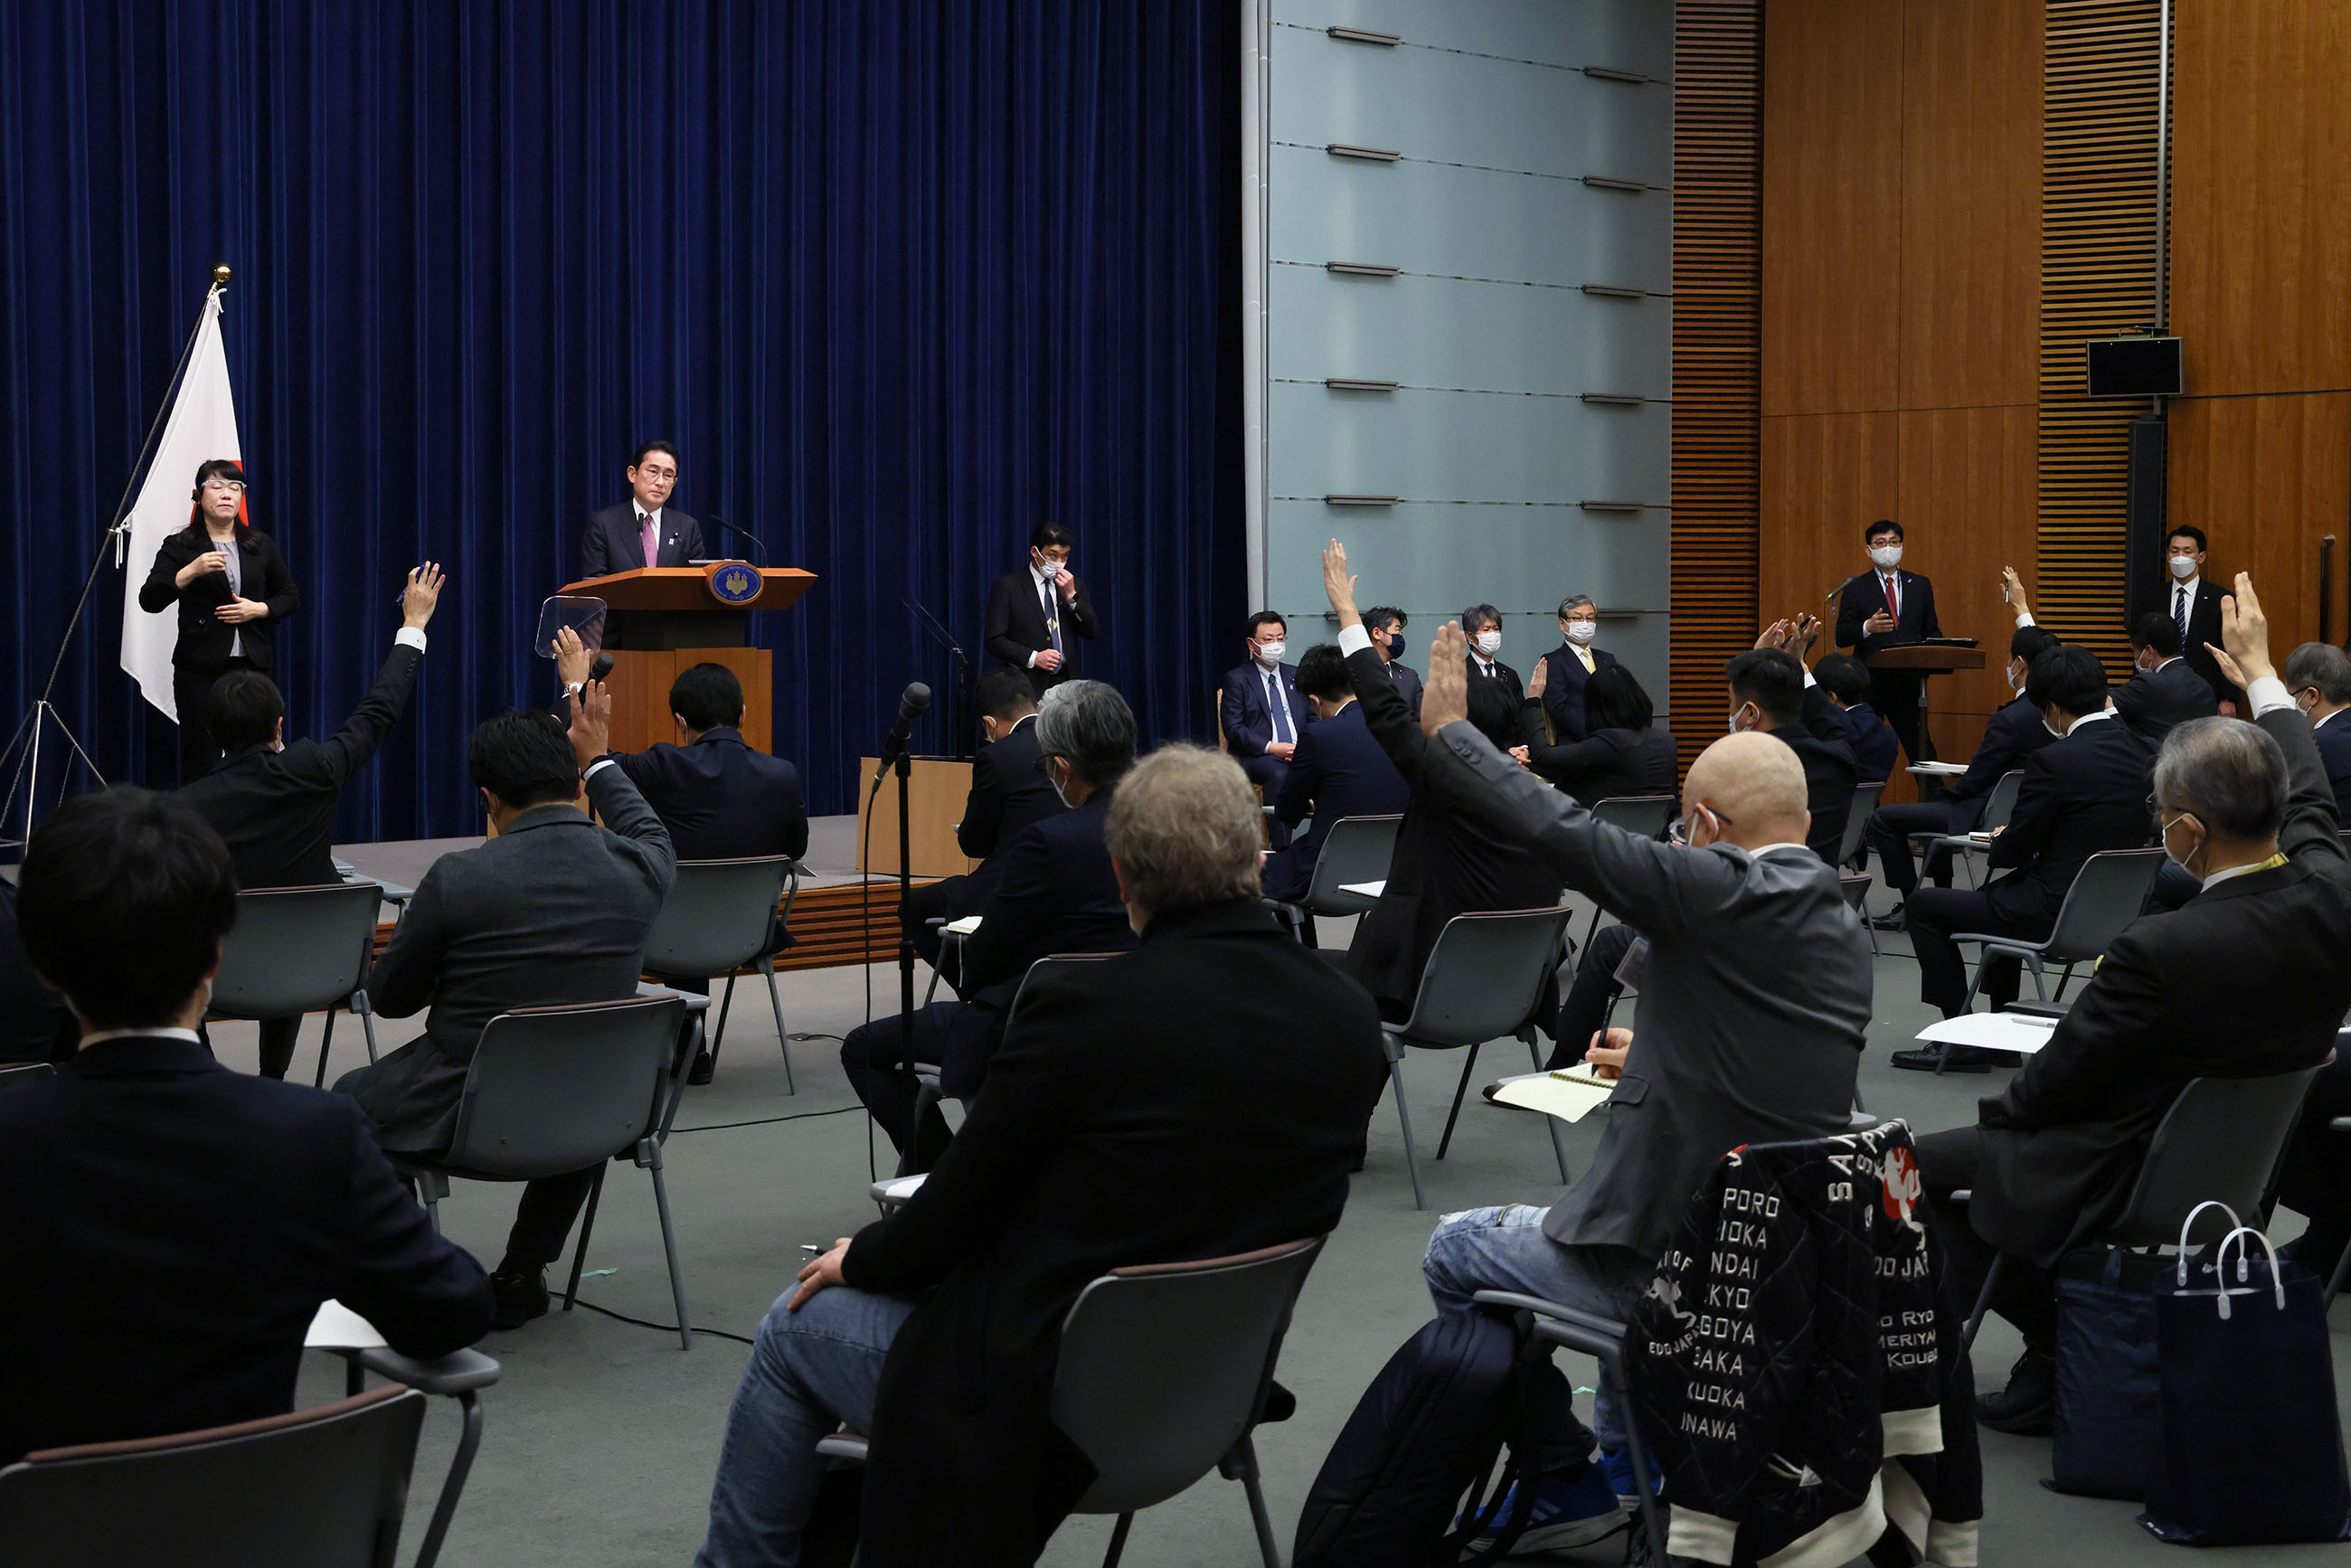 Prime Minister Kishida answering questions from the journalists (1)